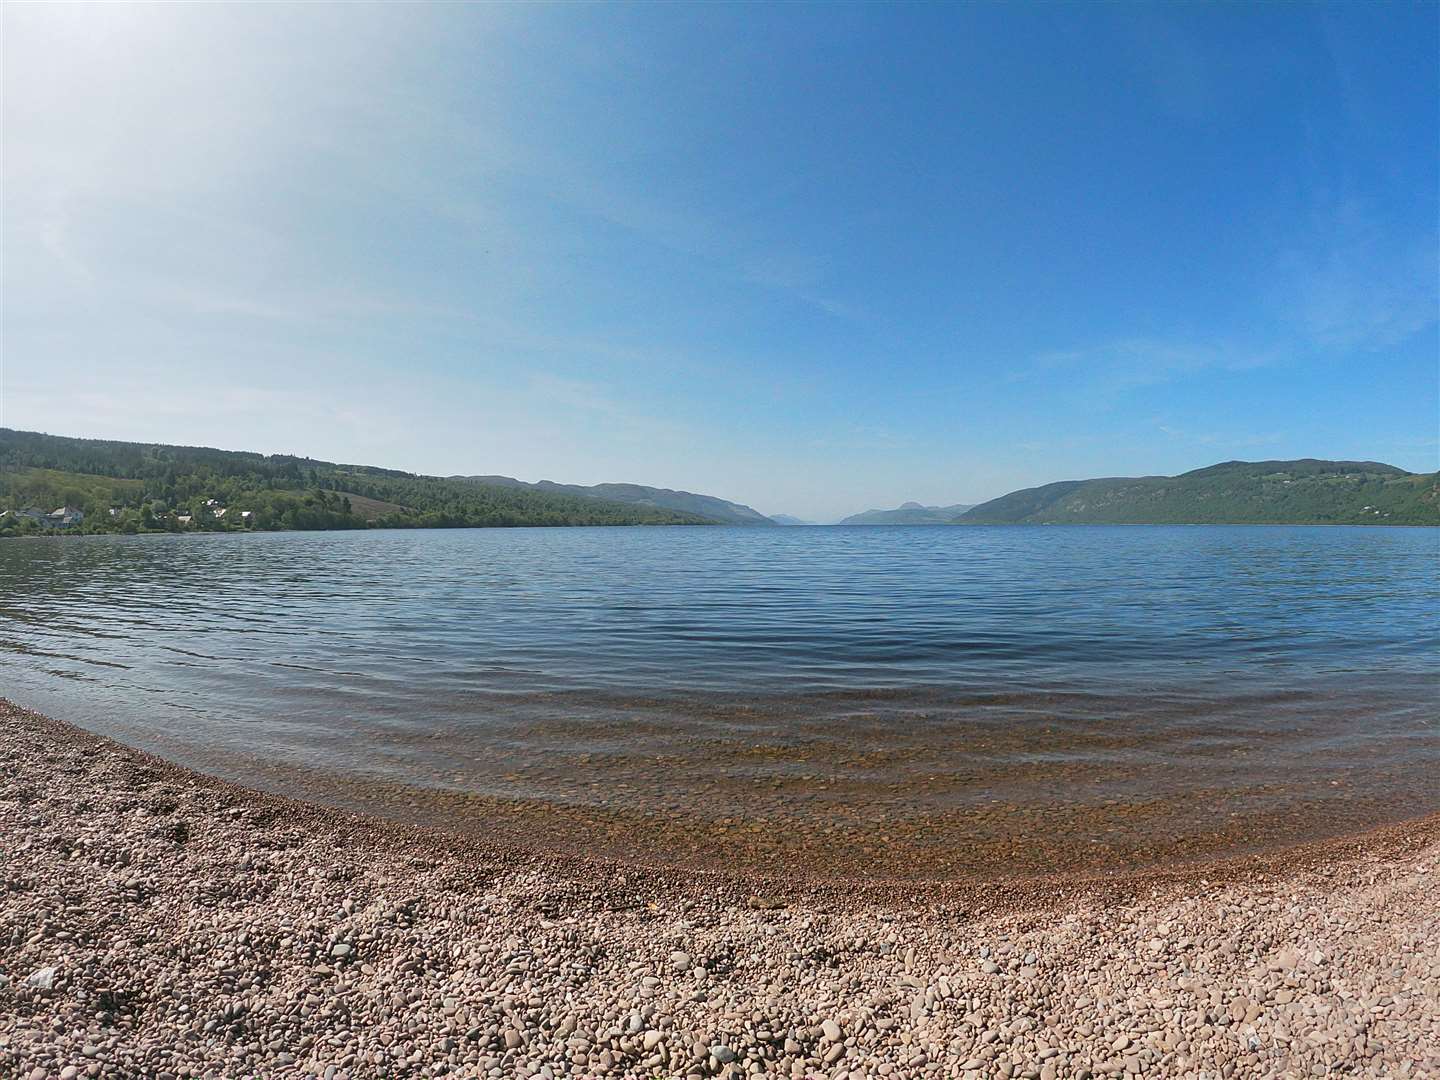 Loch Ness at lowest in 32 years.